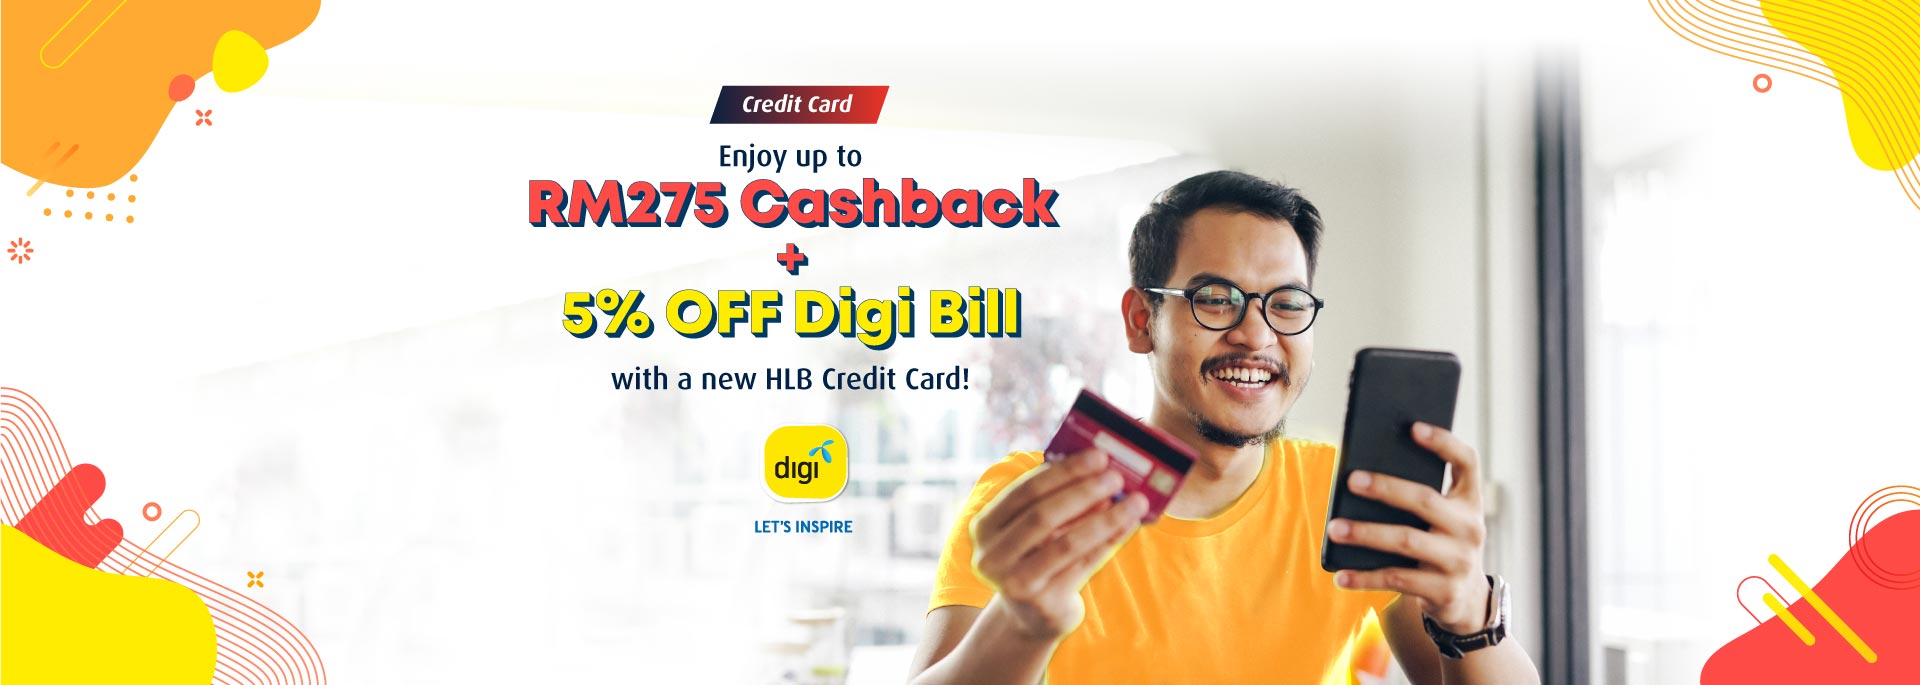 Exclusively for Digi users! Dial in the rewards when you apply for HLB Credit Card